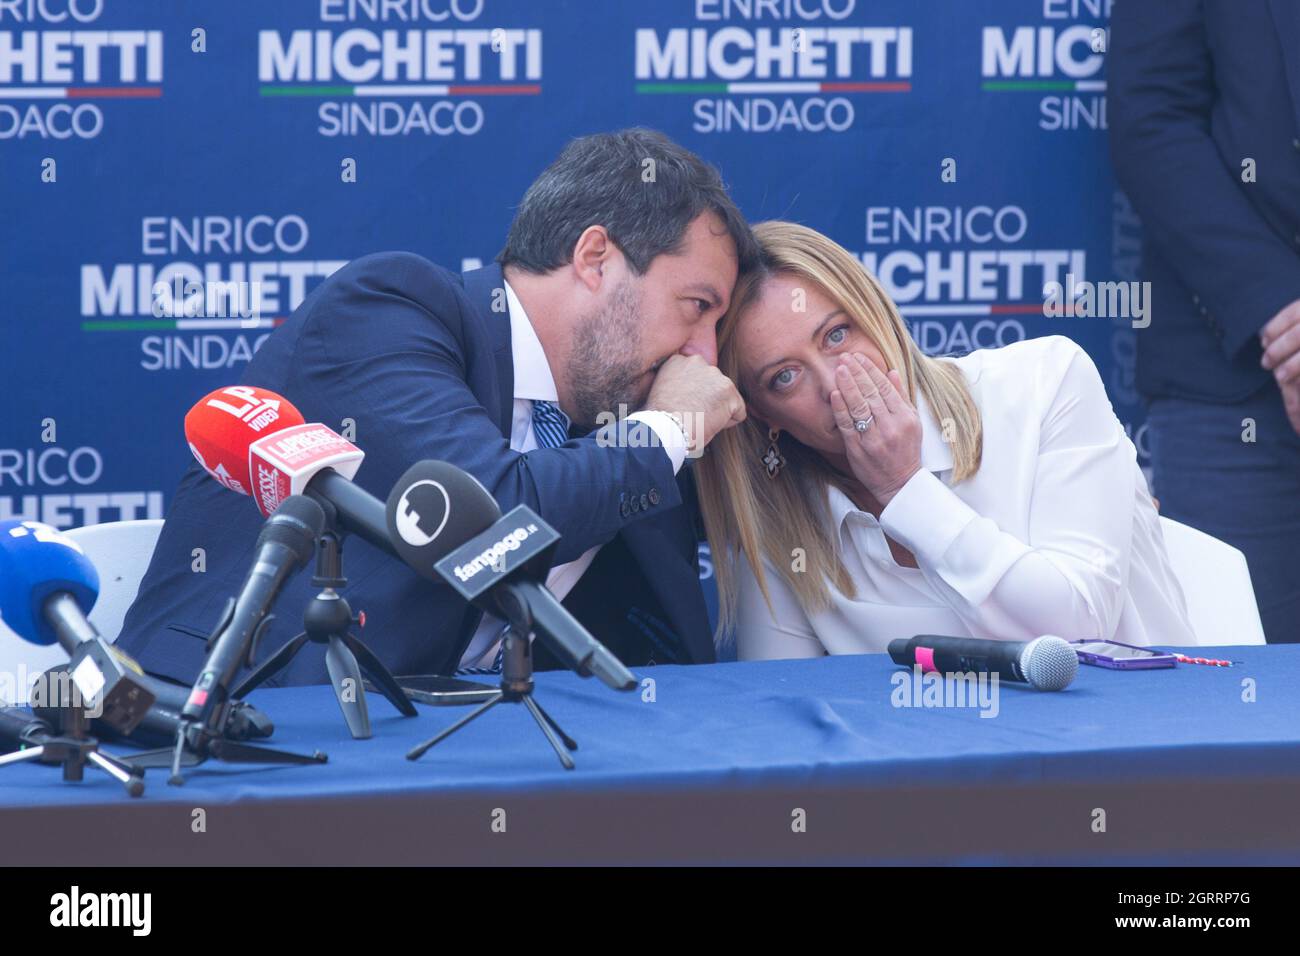 Rome, Italy. 01st Oct, 2021. Matteo Salvini and Giorgia Meloni during press conference in Spinaceto district of Rome to close center-right electoral campaign (Photo by Matteo Nardone/Pacific Press) Credit: Pacific Press Media Production Corp./Alamy Live News Stock Photo